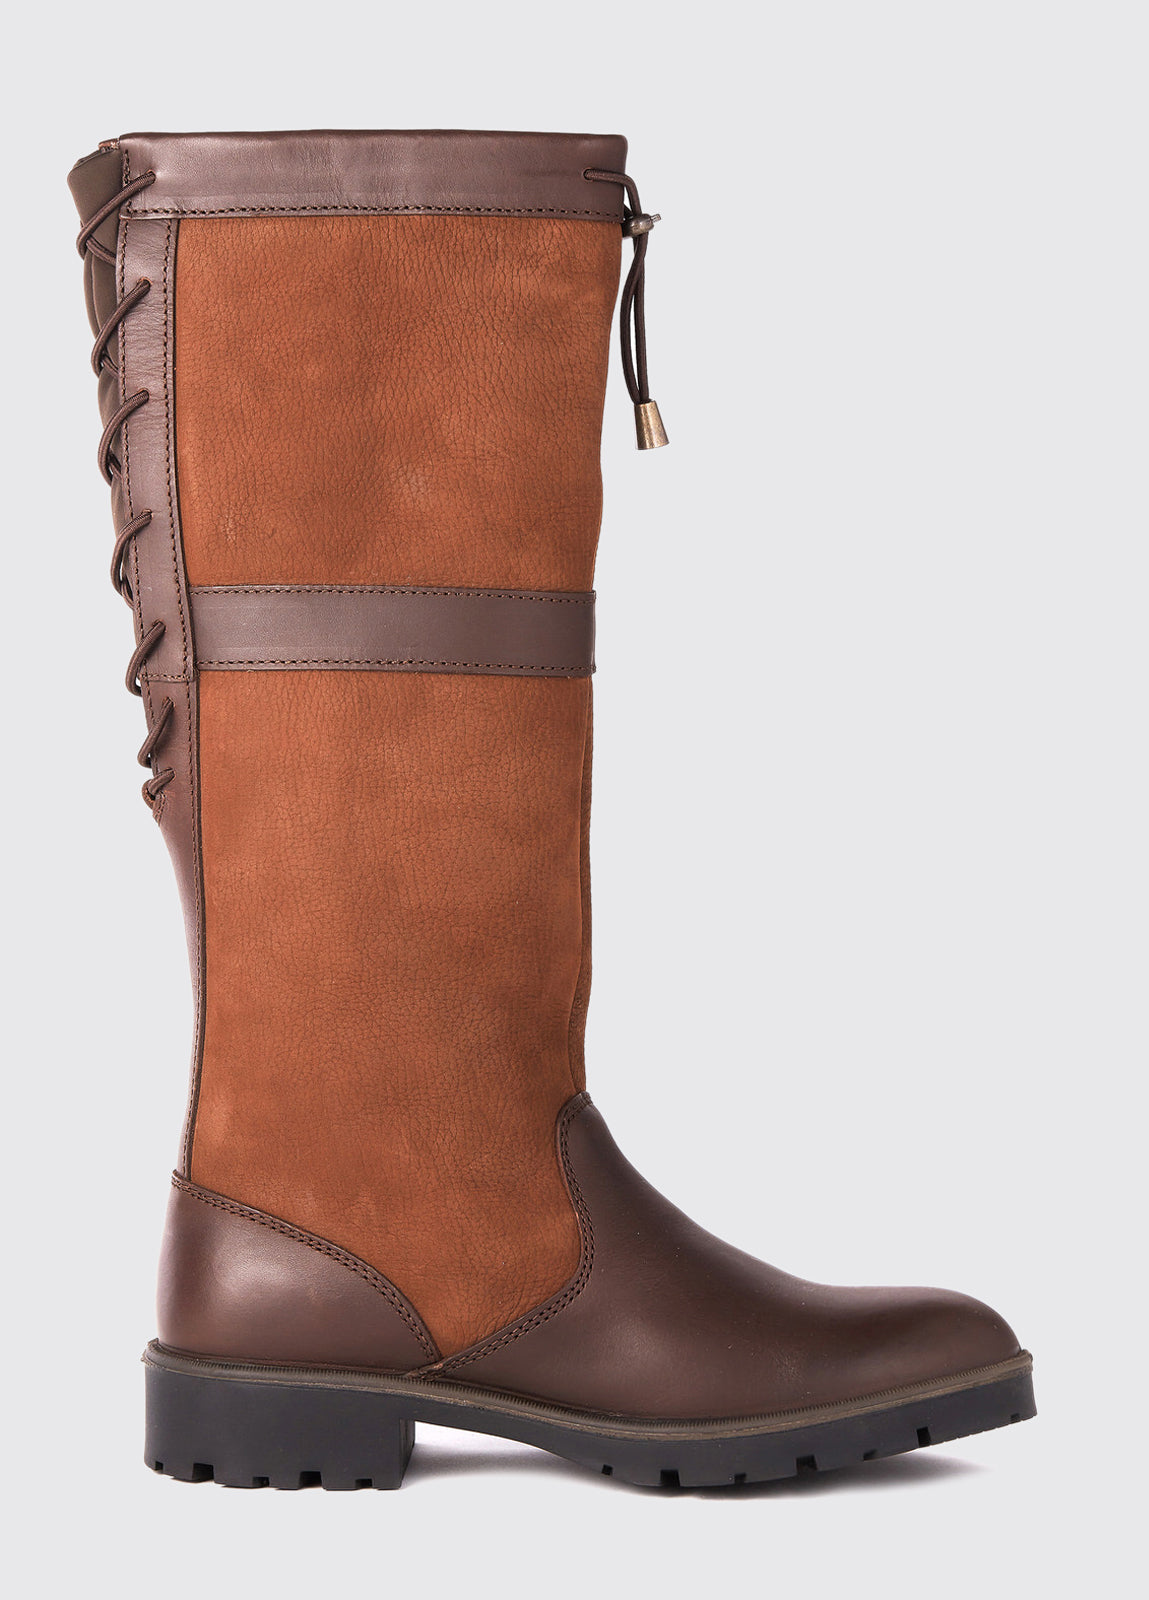 Dubarry Ladies Glanmire Country Boot in Walnut